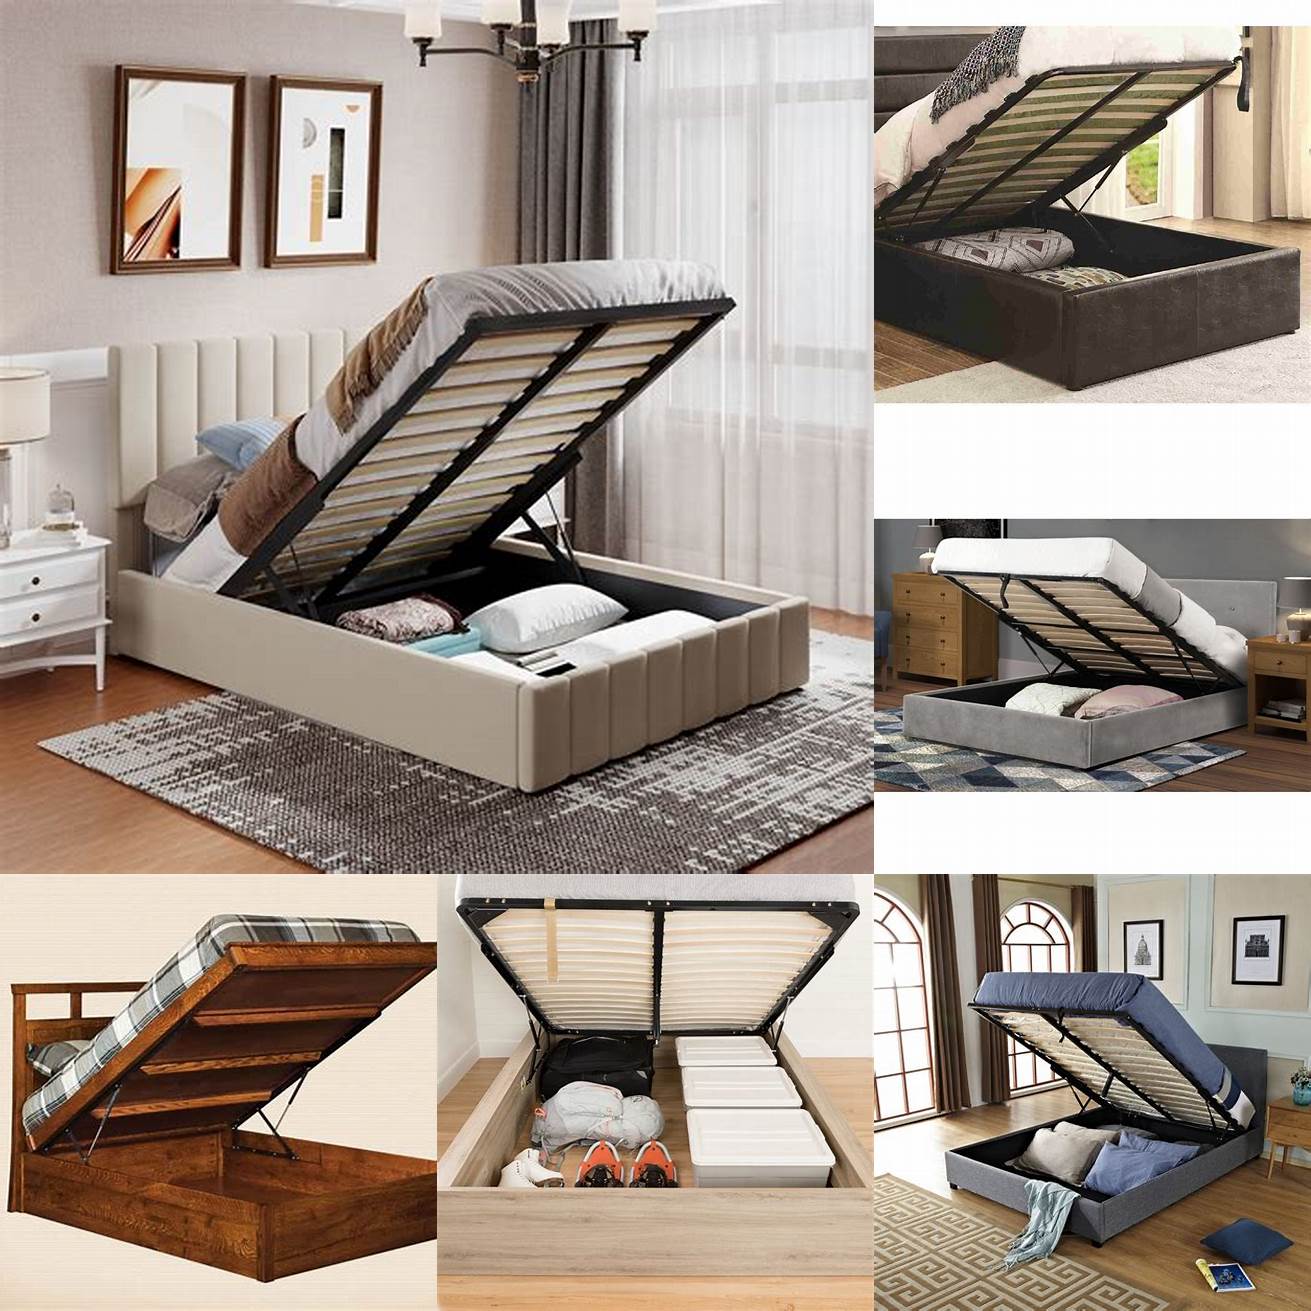 A lift-up platform bed with storage